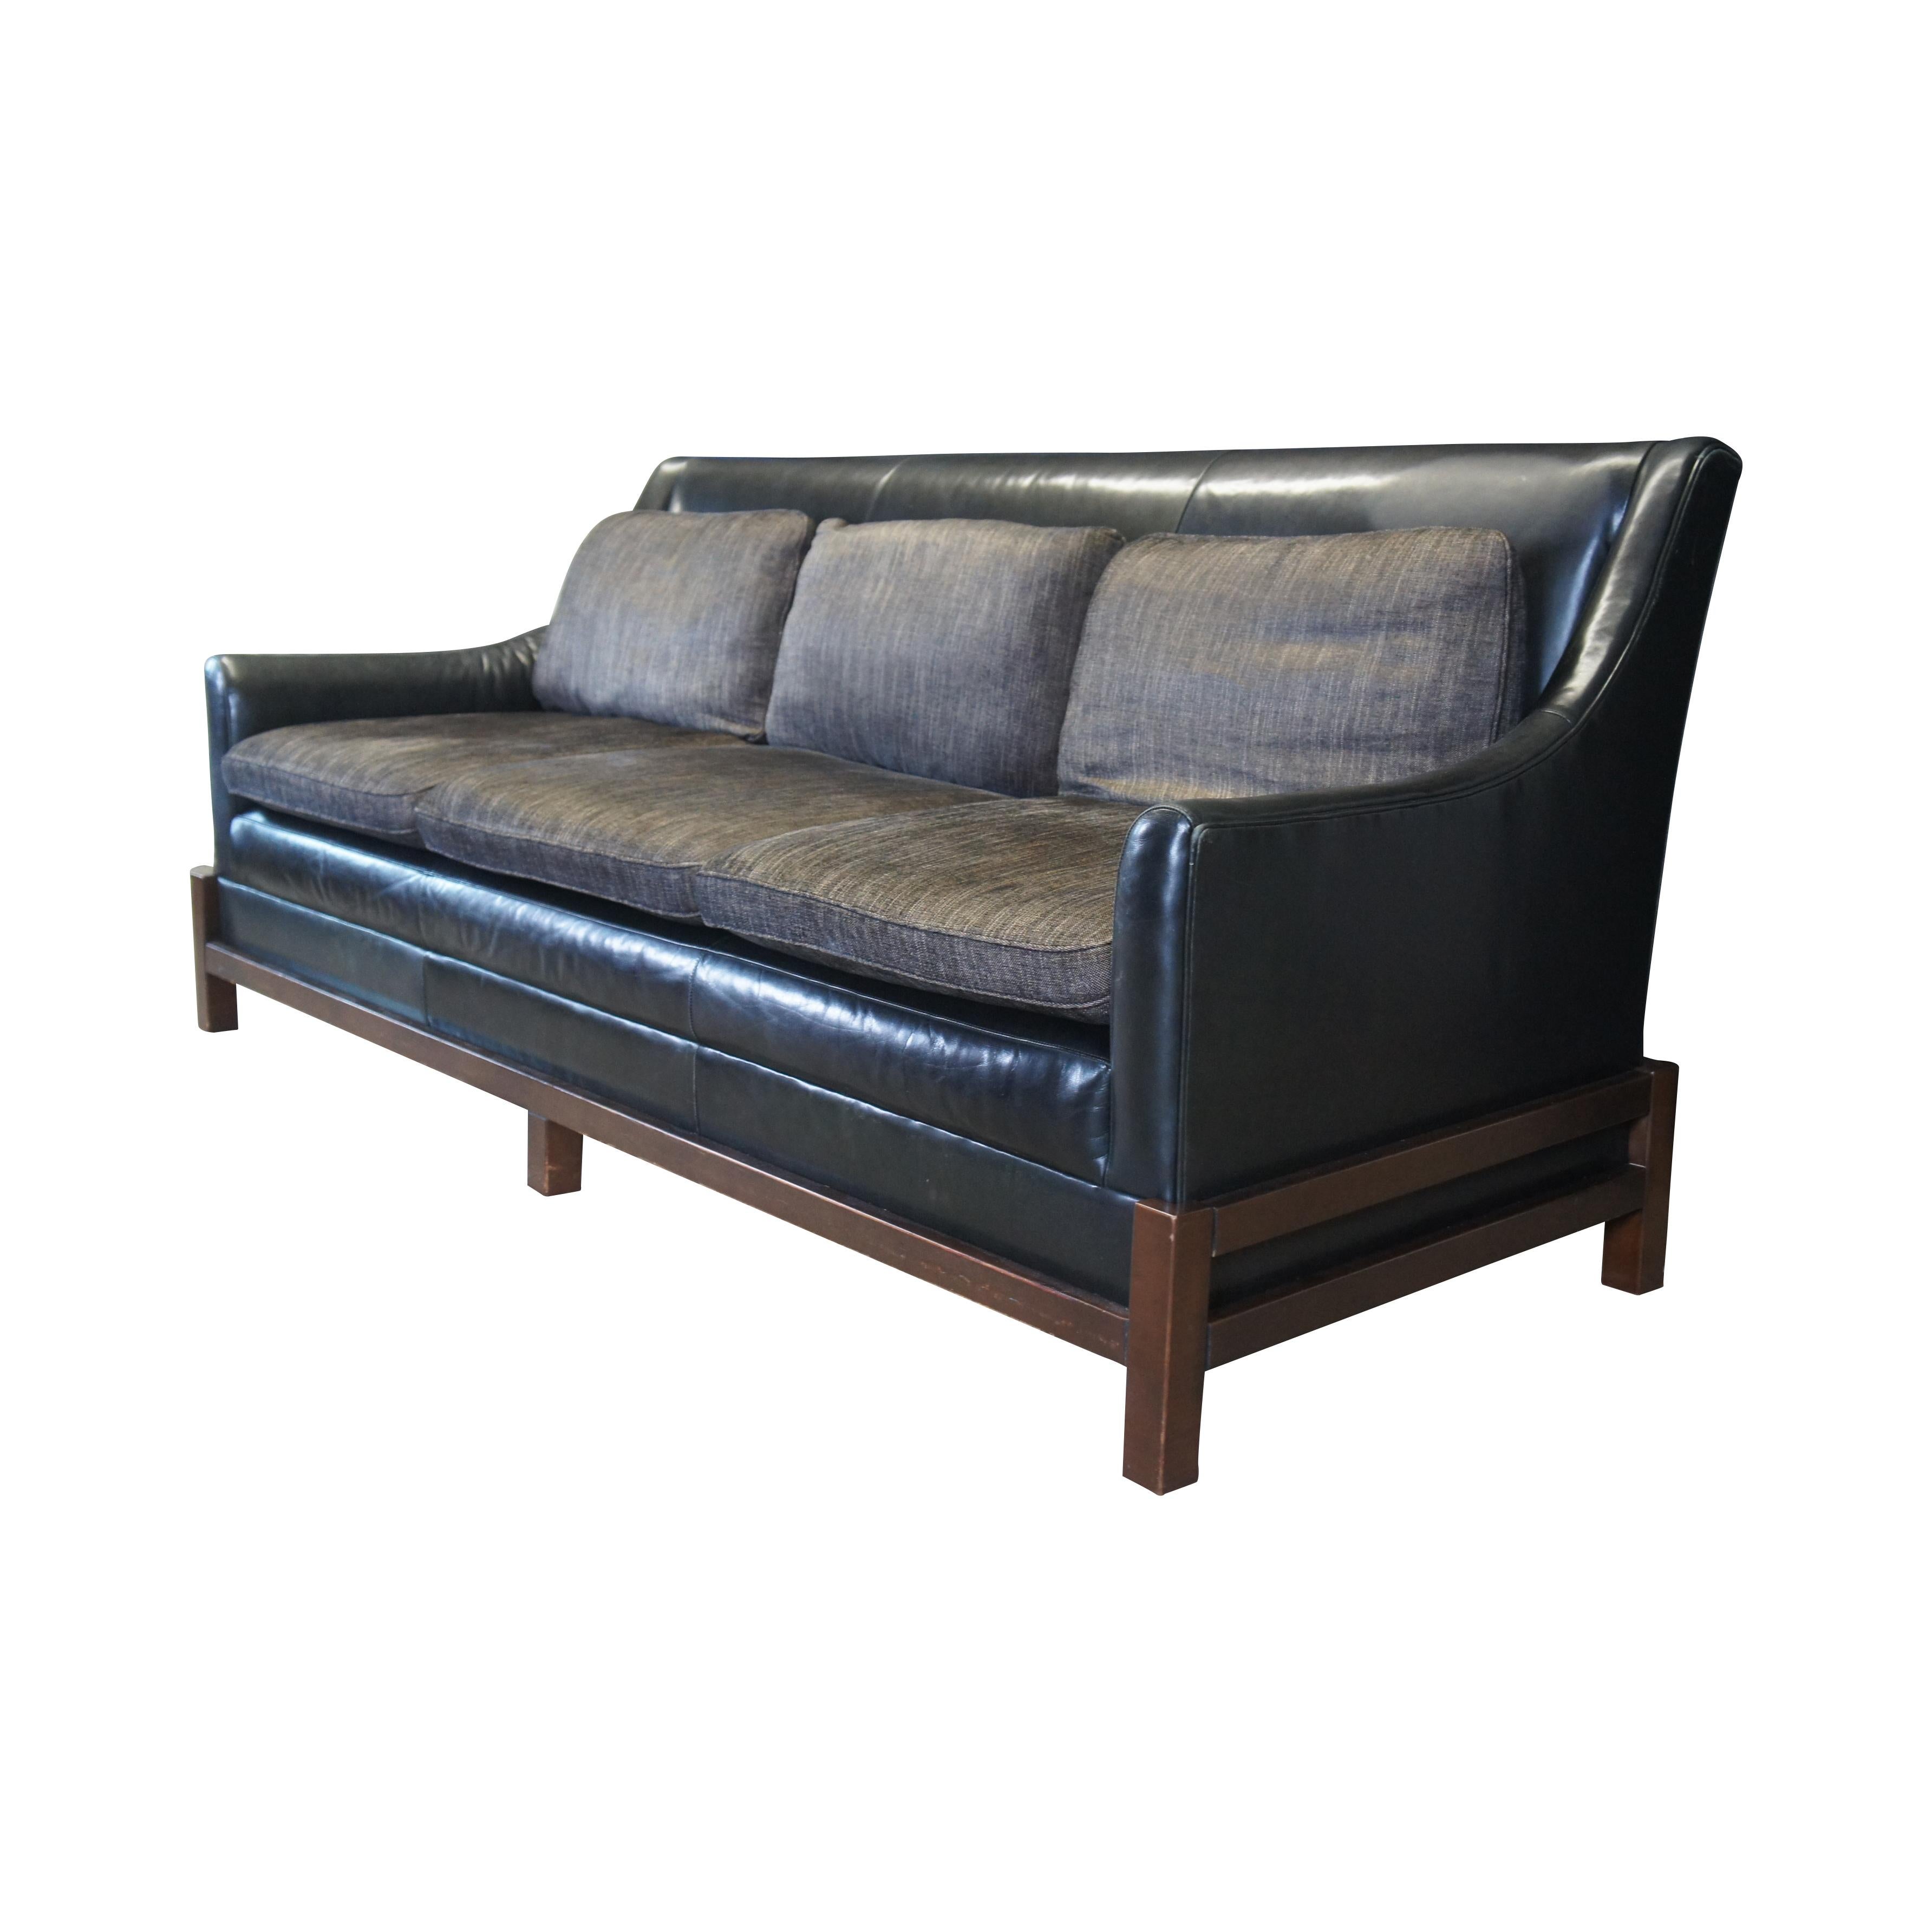 Vintage Baker Furniture Laura Kirar Modern Black Leather 3 Seater Neue Sofa In Good Condition For Sale In Dayton, OH